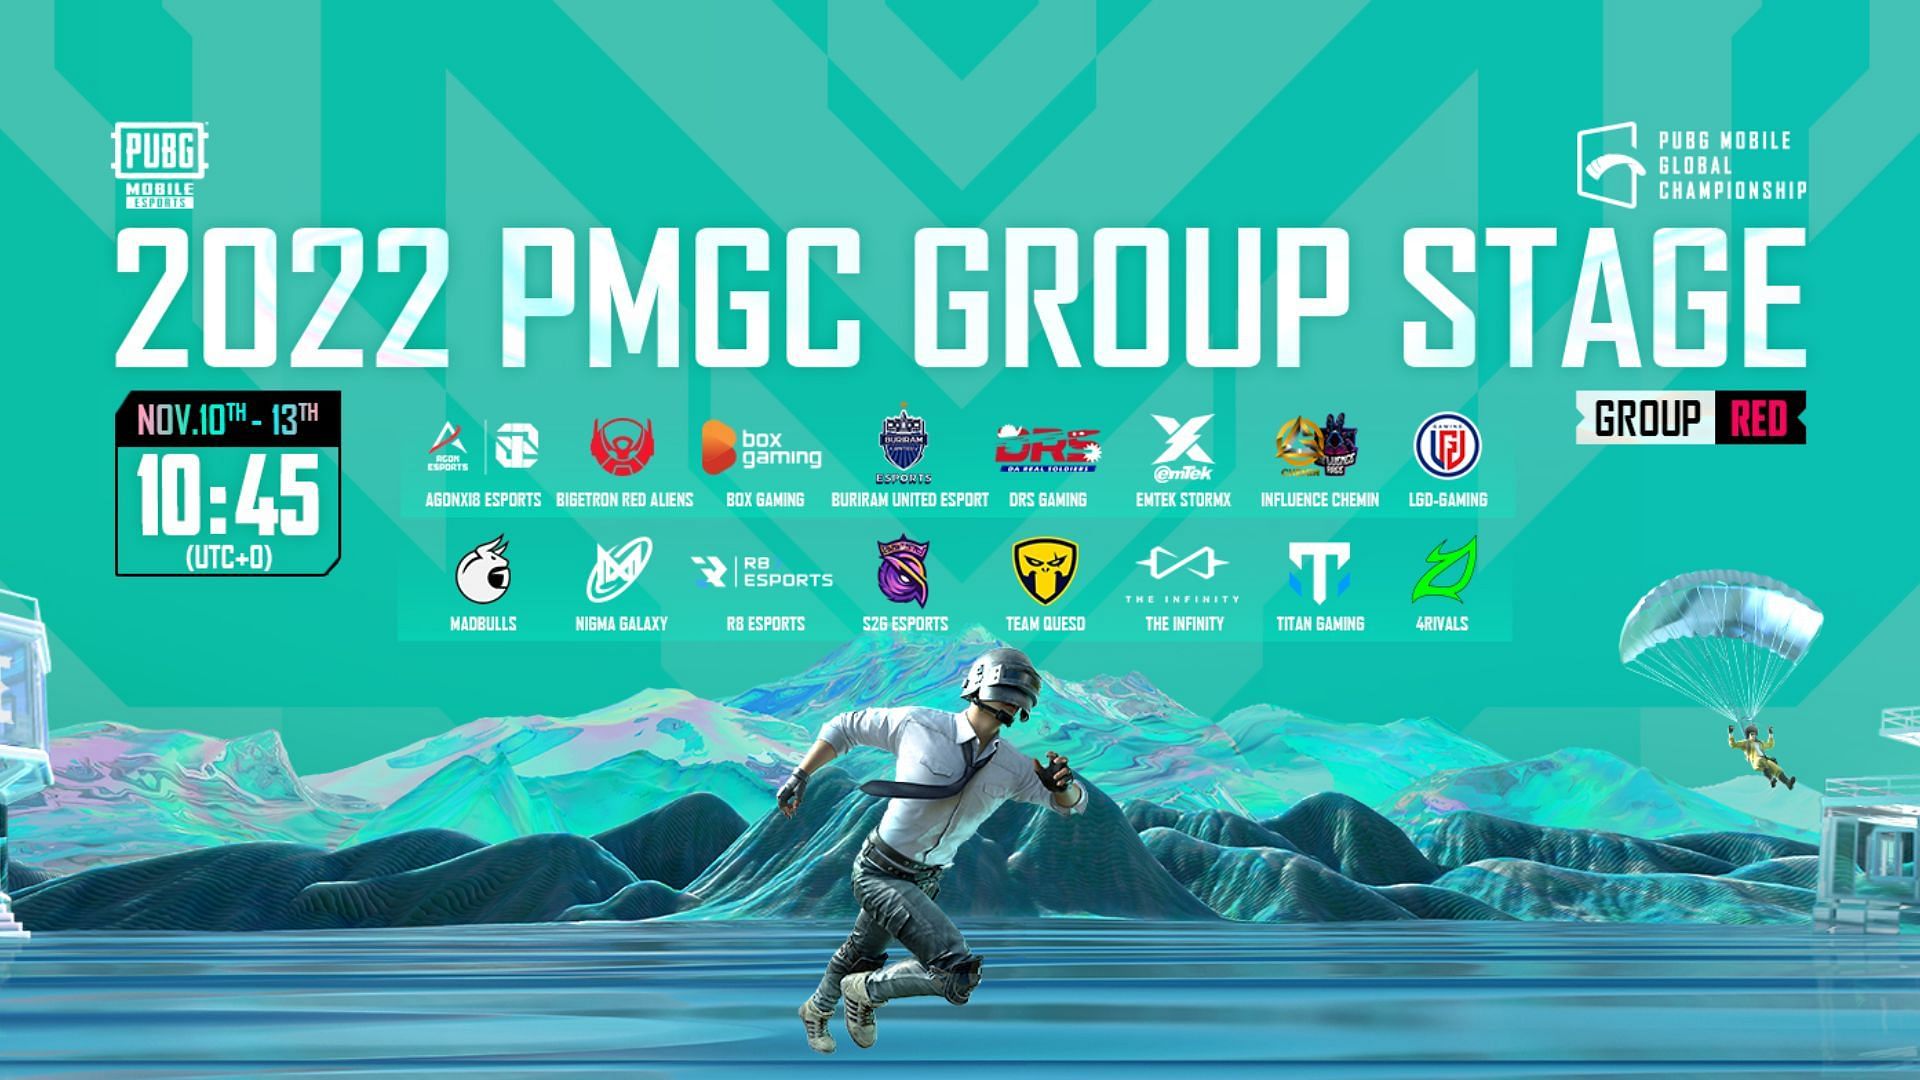 Red participants of the PMGC group (Image via PUBG Mobile)